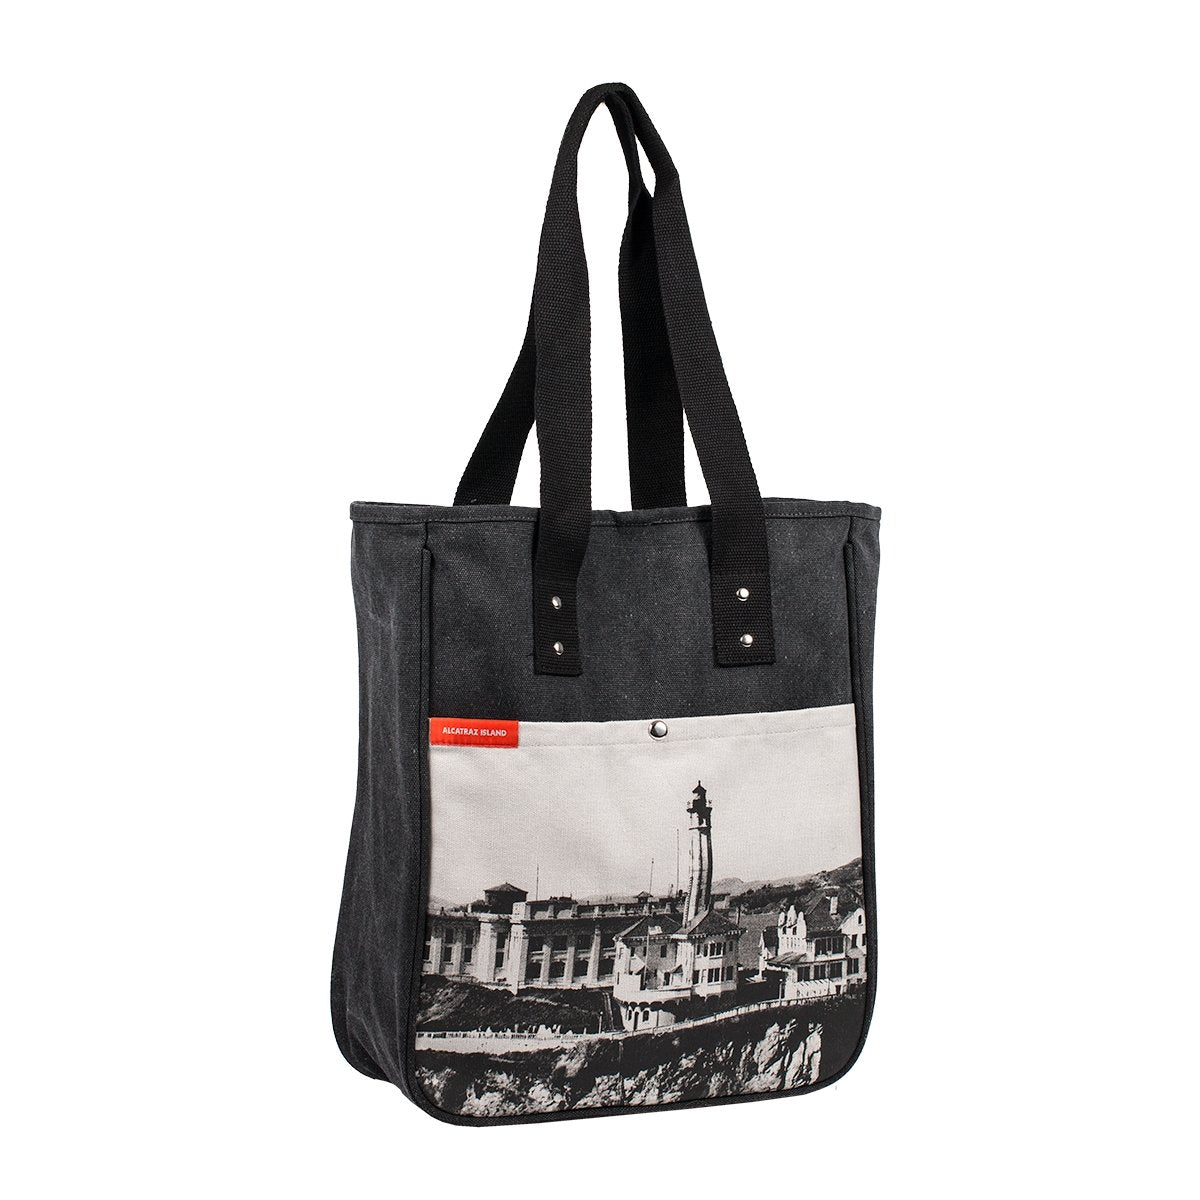 Grey tote bag with black-and-white photograph of Alcatraz Island lighthouse on front pocket.